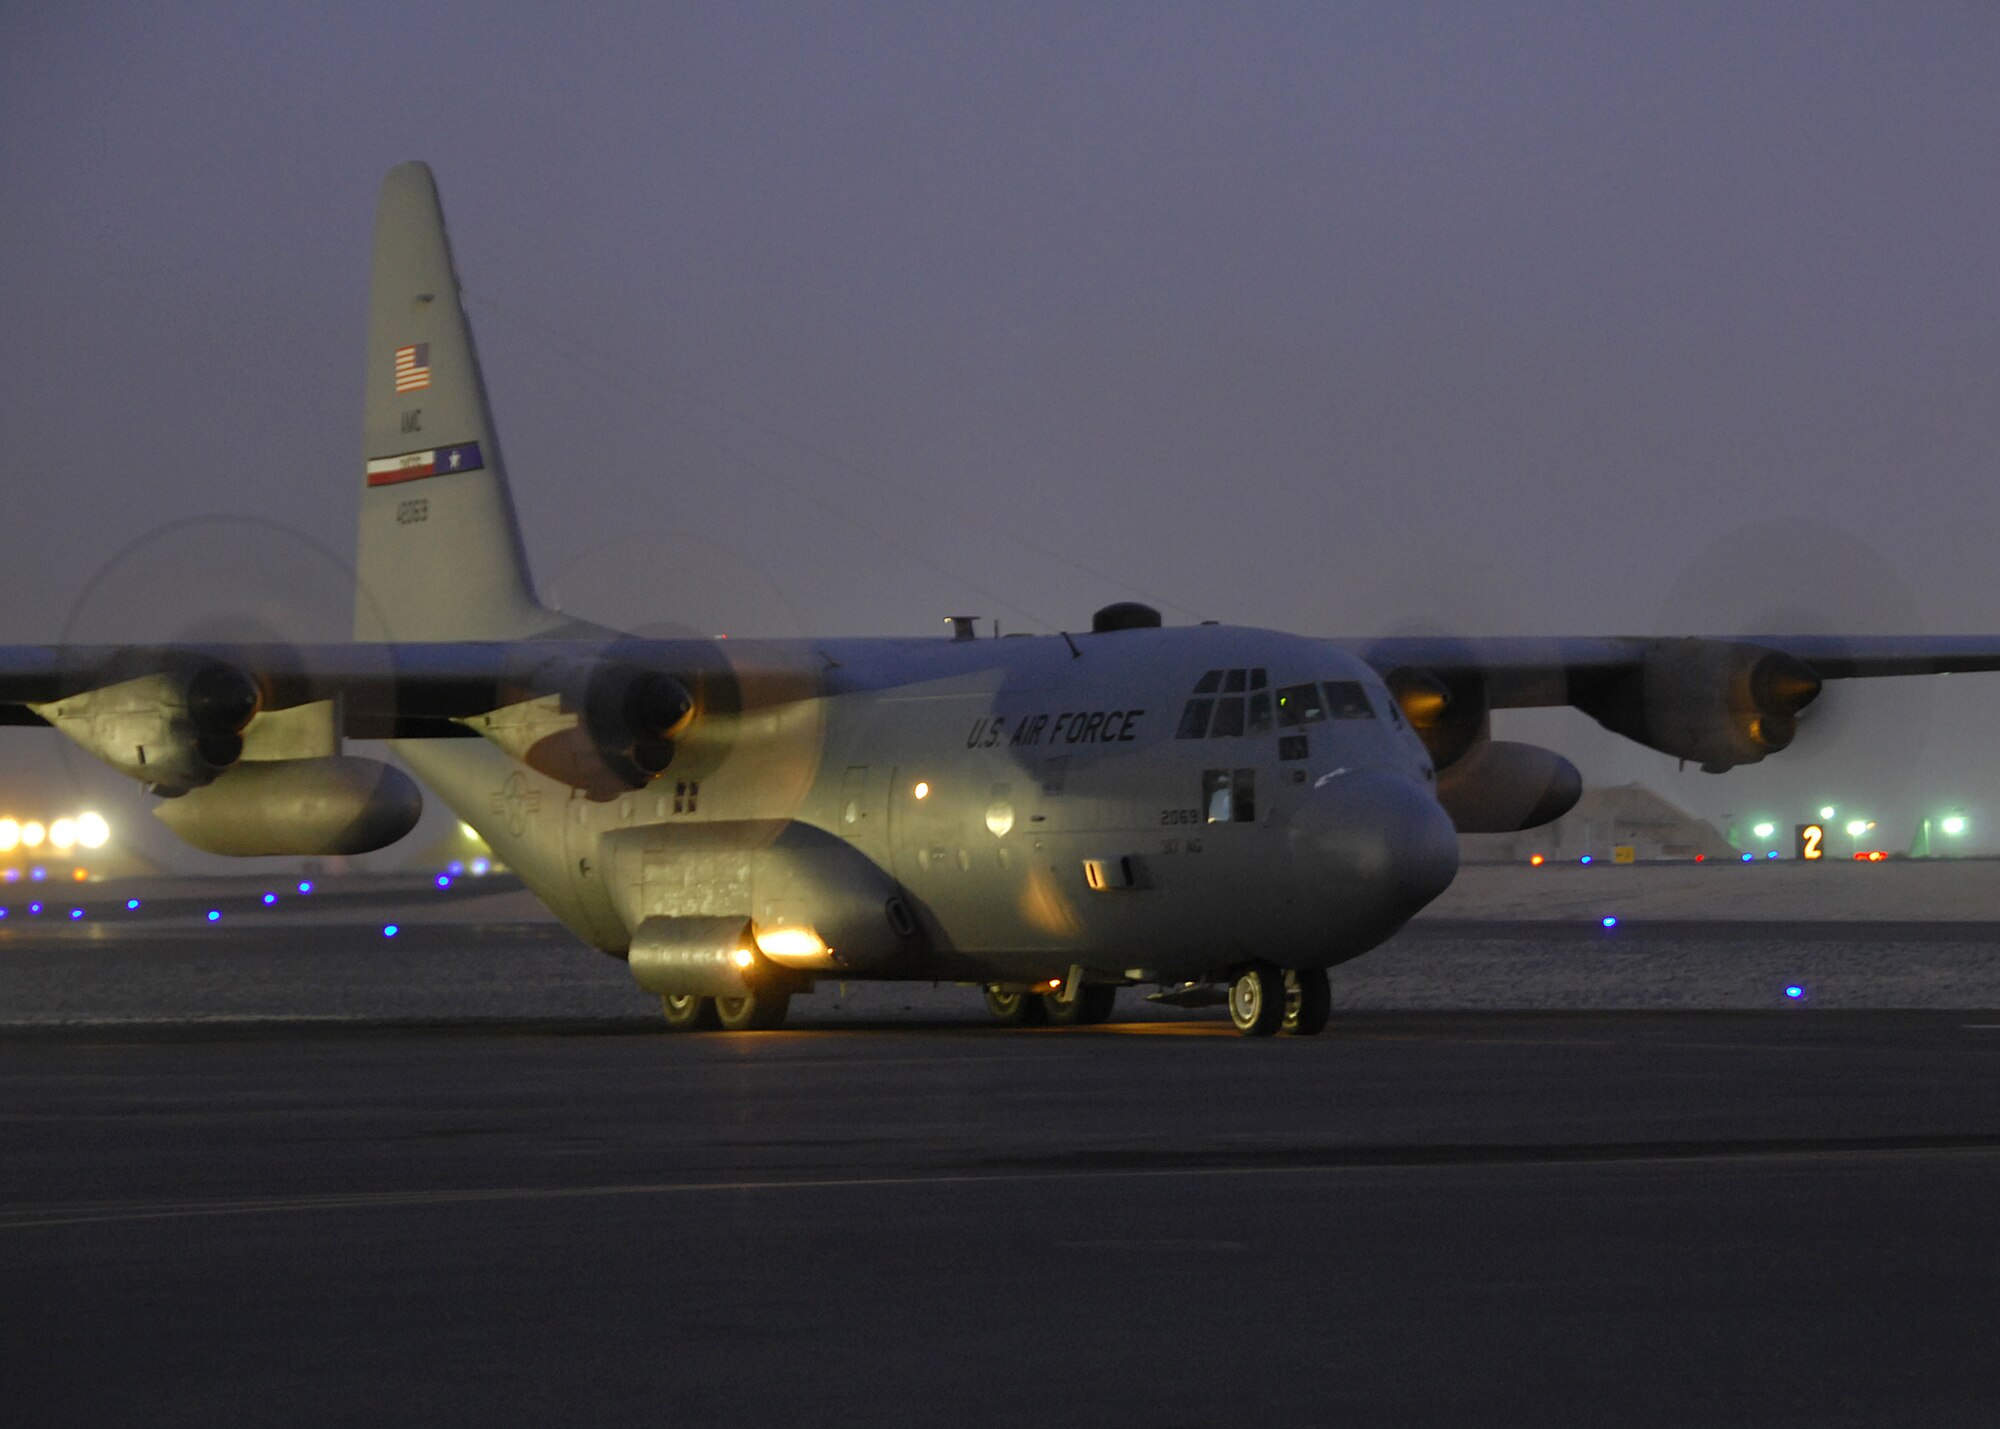 SOUTHWEST ASIA -- A C-130 assigned to the 386th Expeditionary Operations Group prepares to depart on a sortie en route to Iraq on Aug. 6 at a base in Southwest Asia. The 386th Air Expeditionary Wing has moved close to half a million passengers and more than 57,000 tons of cargo this year alone, in support of Operations Iraqi and Enduring Freedom. The C-130 is deployed from Dyess Air Force Base, Texas. (U.S. Air Force photo/Tech. Sgt. Raheem Moore)